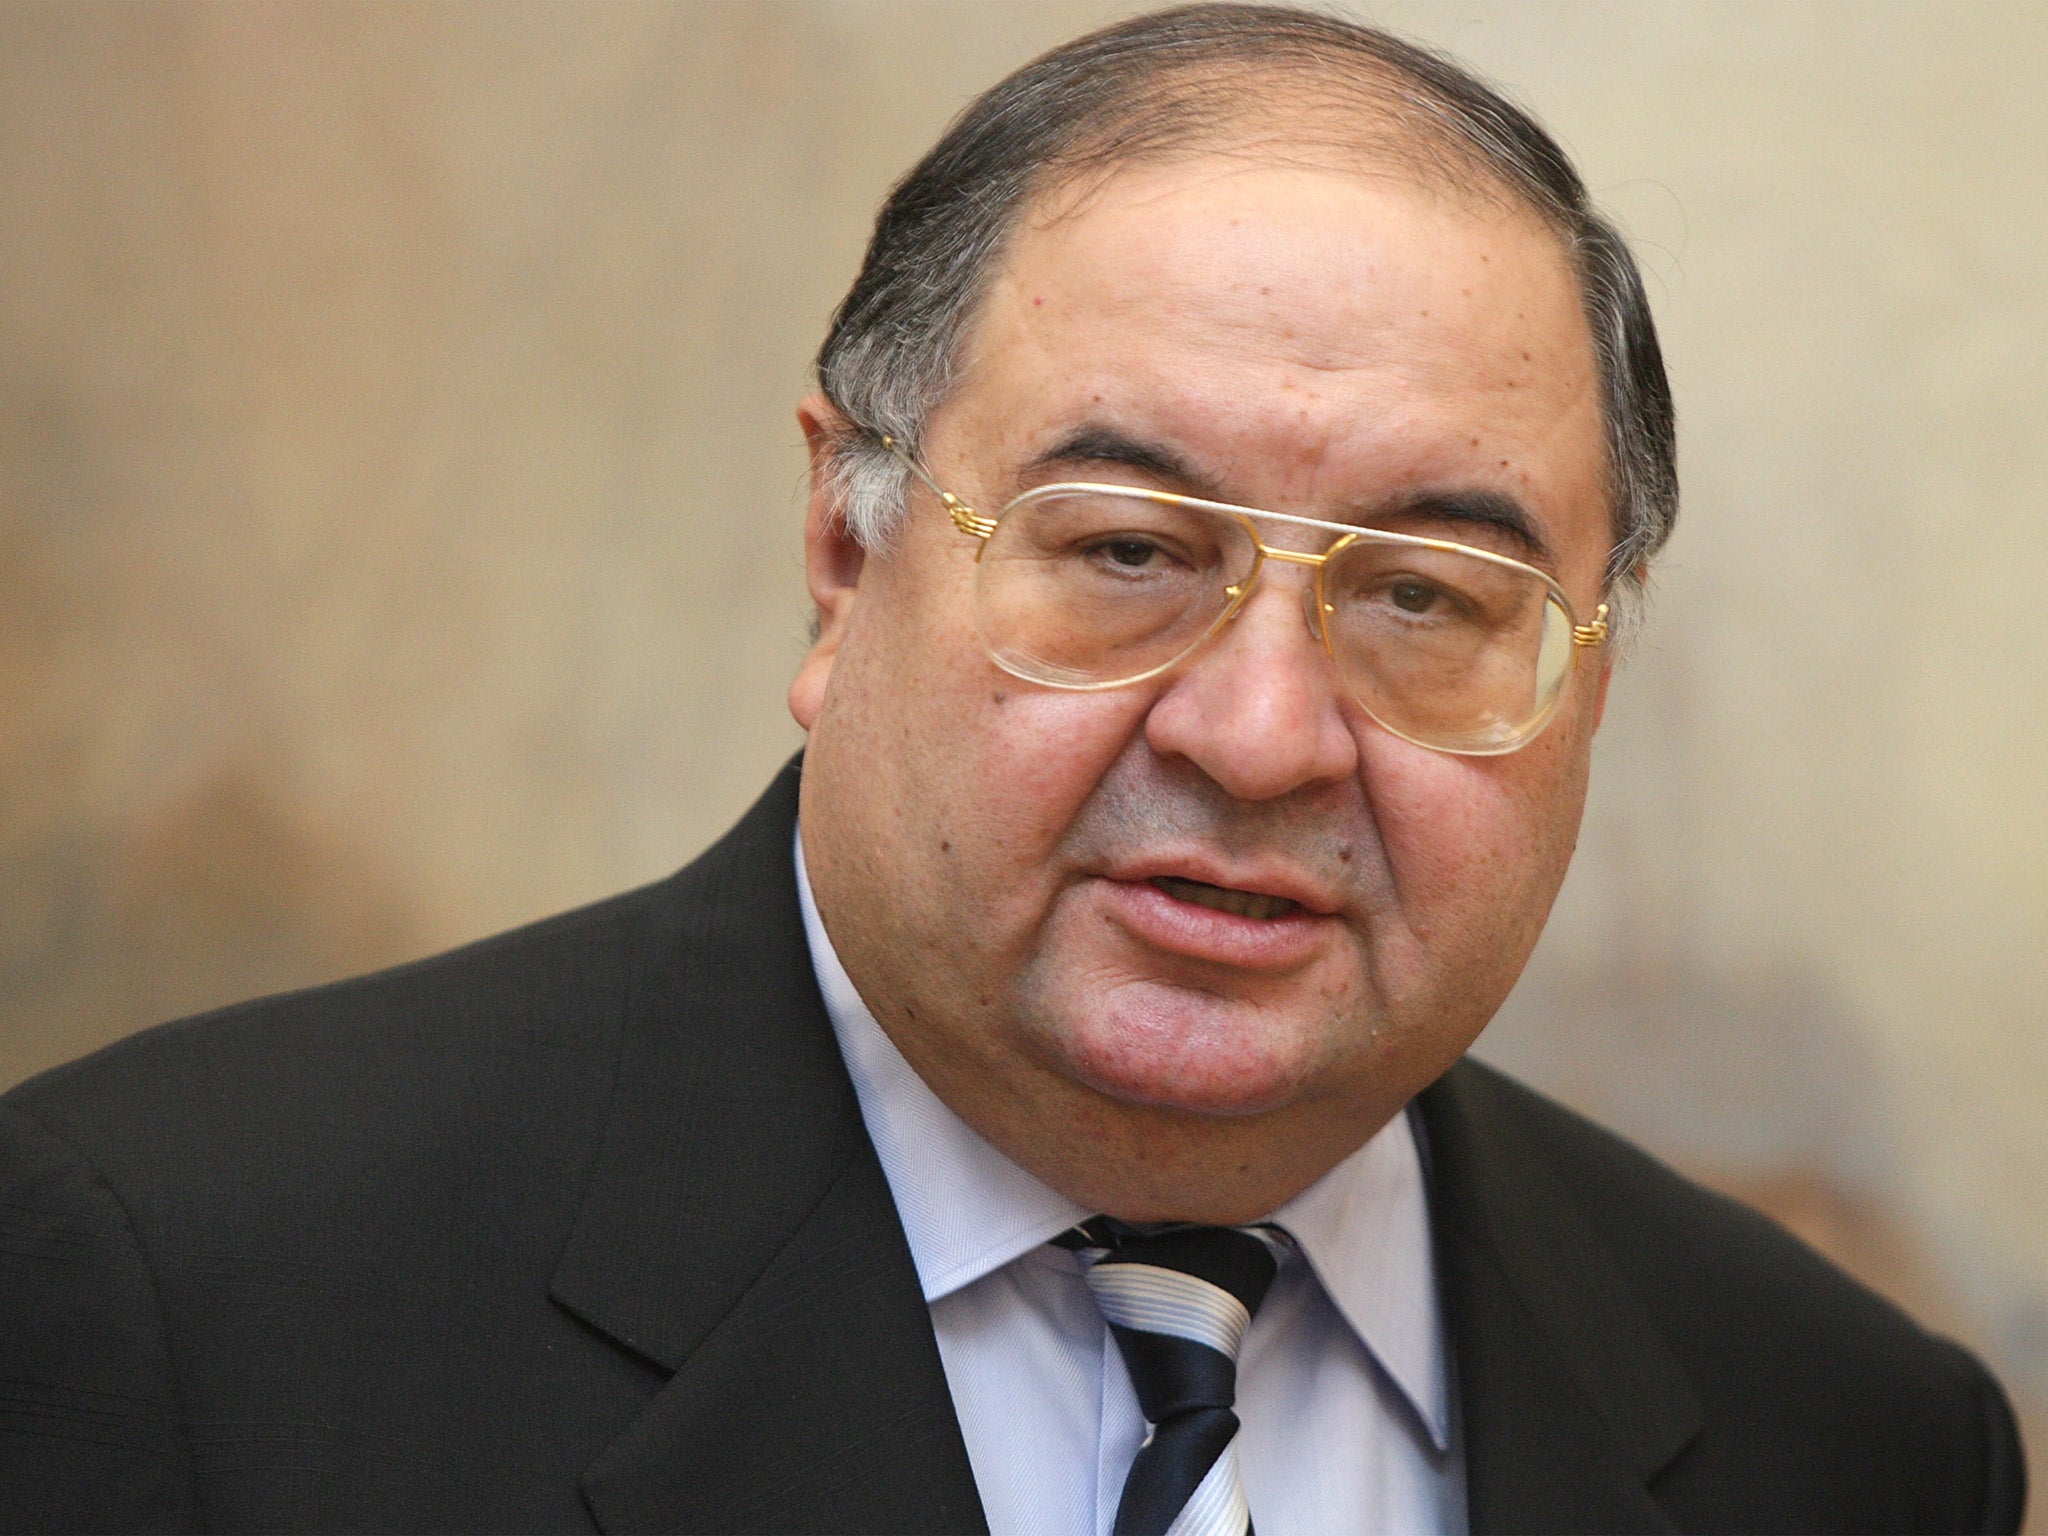 Alisher Usmanov holds almost 56 per cent of MegaFon and has a 29 per cent stake in Arsenal Football Club